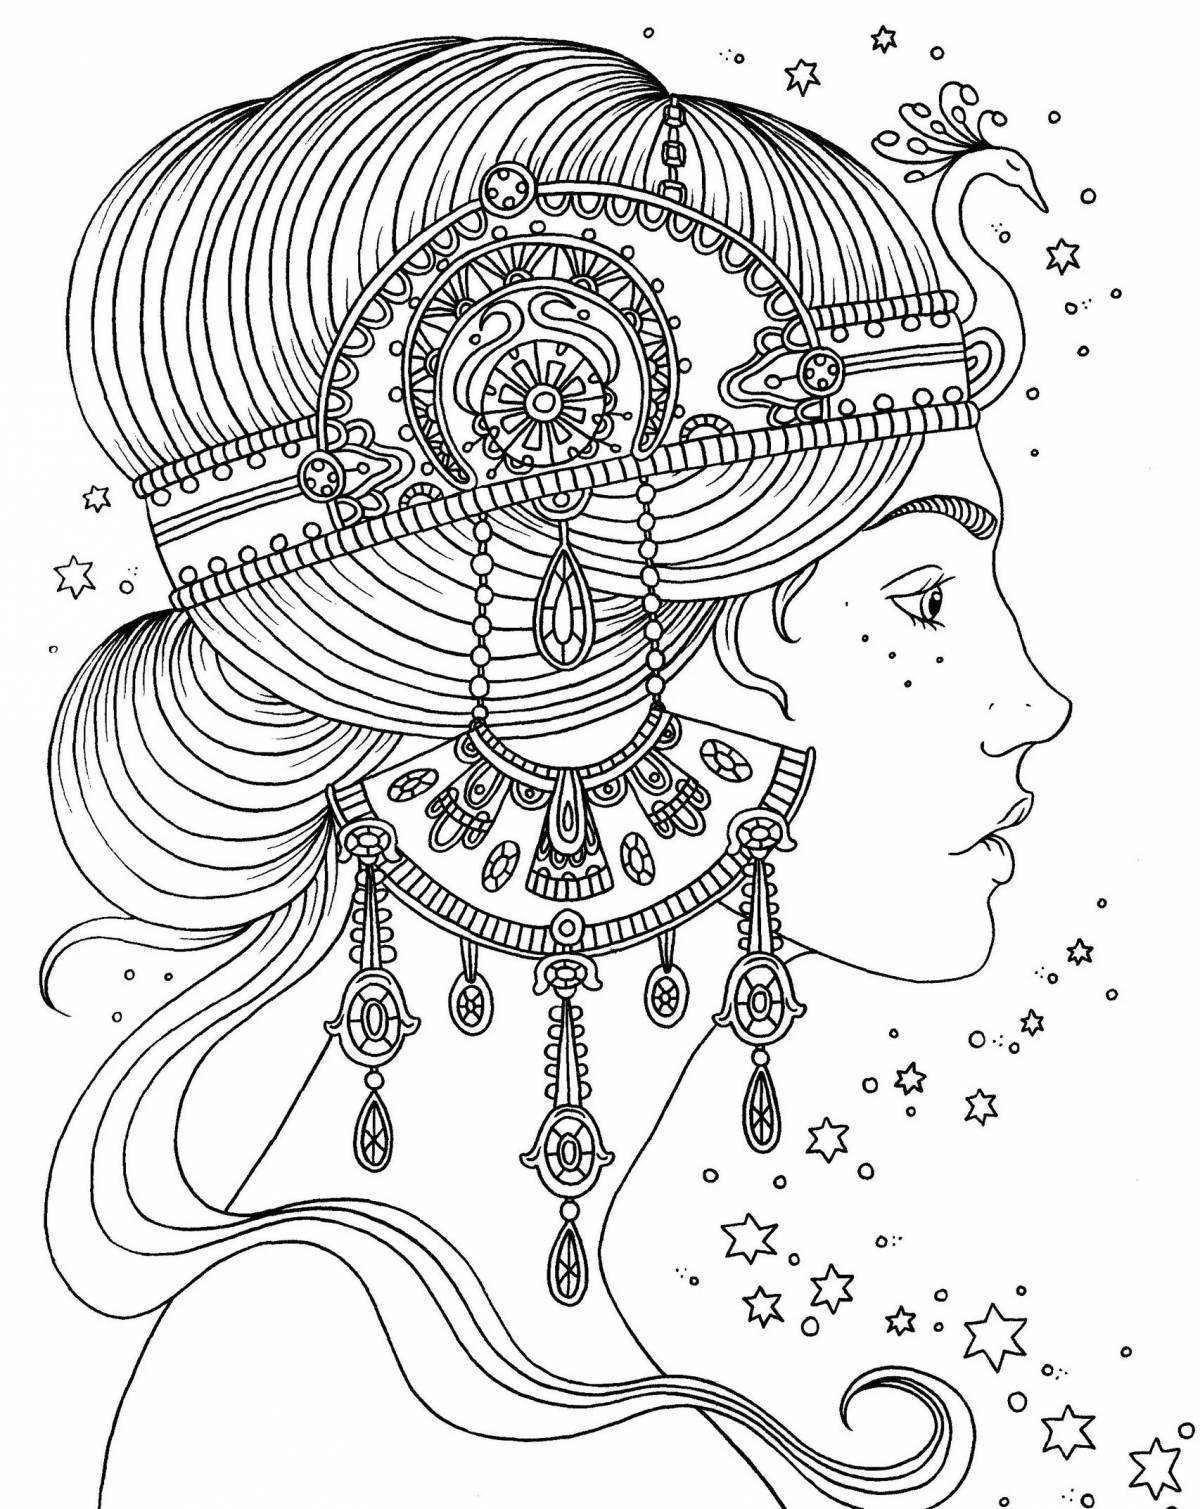 Calm anti-stress coloring book for women